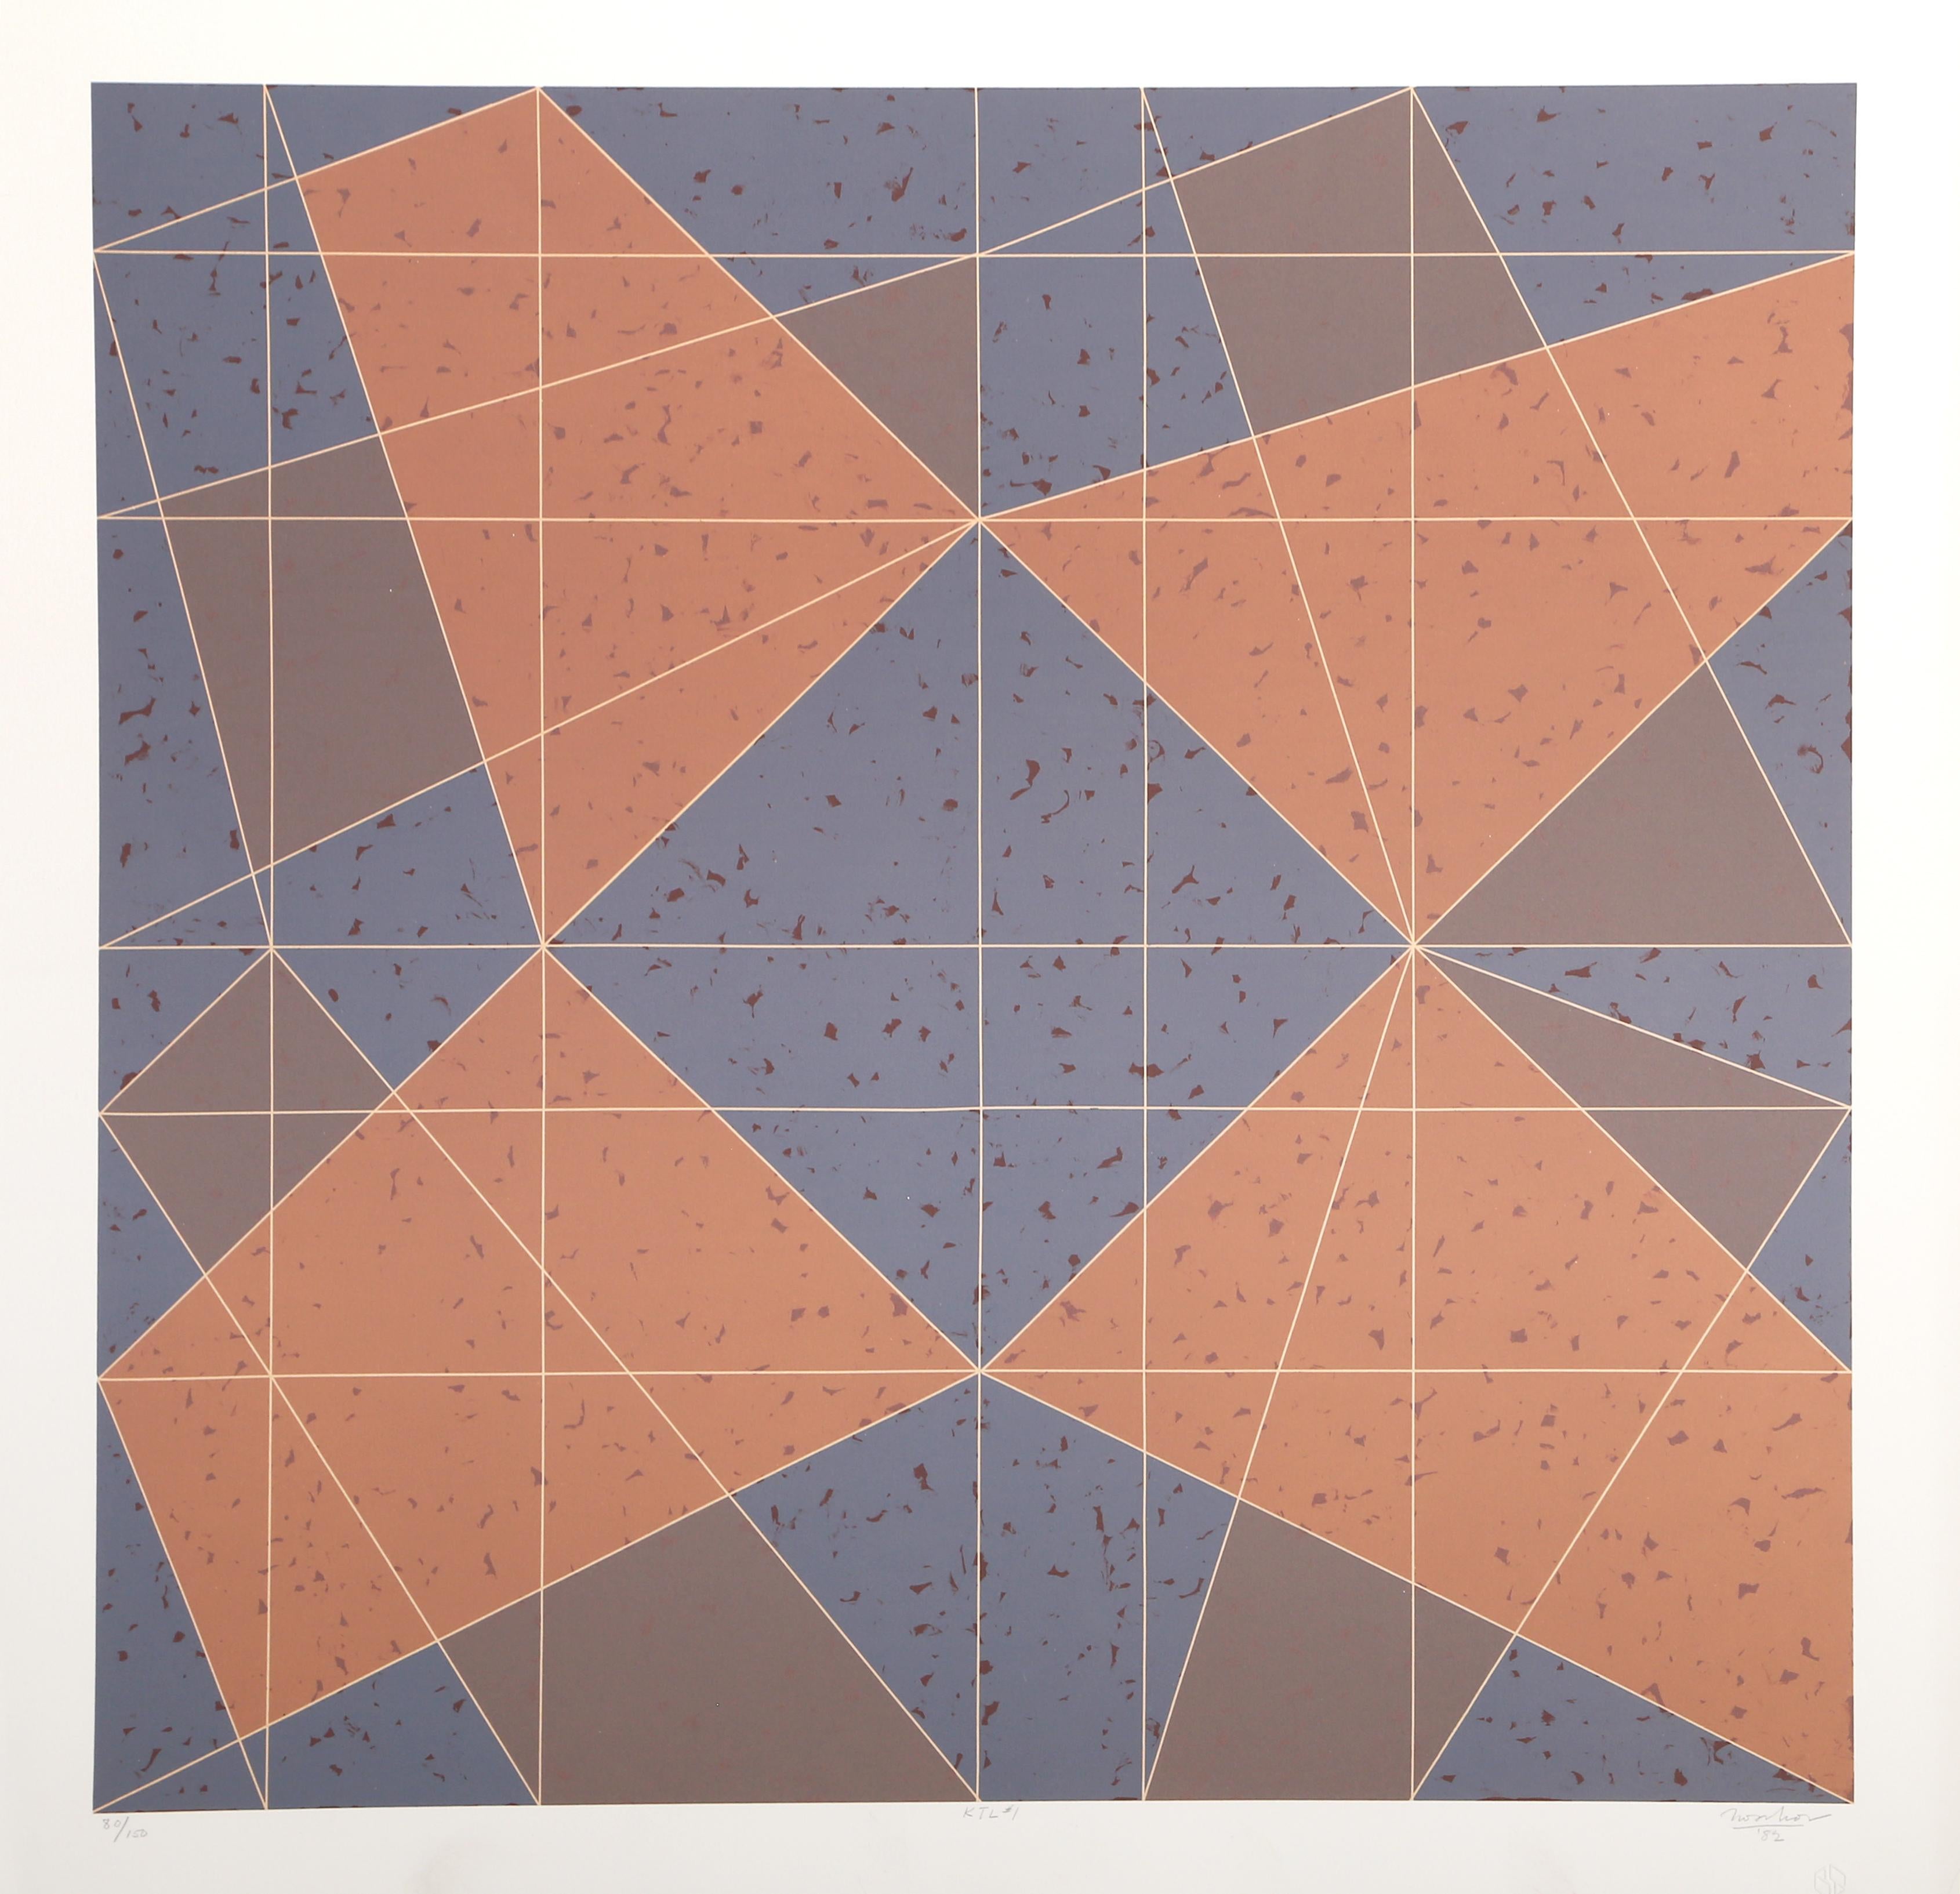 An original geometric silkscreen by Russian/American artist, Jack Tworkov. It is signed and numbered 80/150 in pencil.